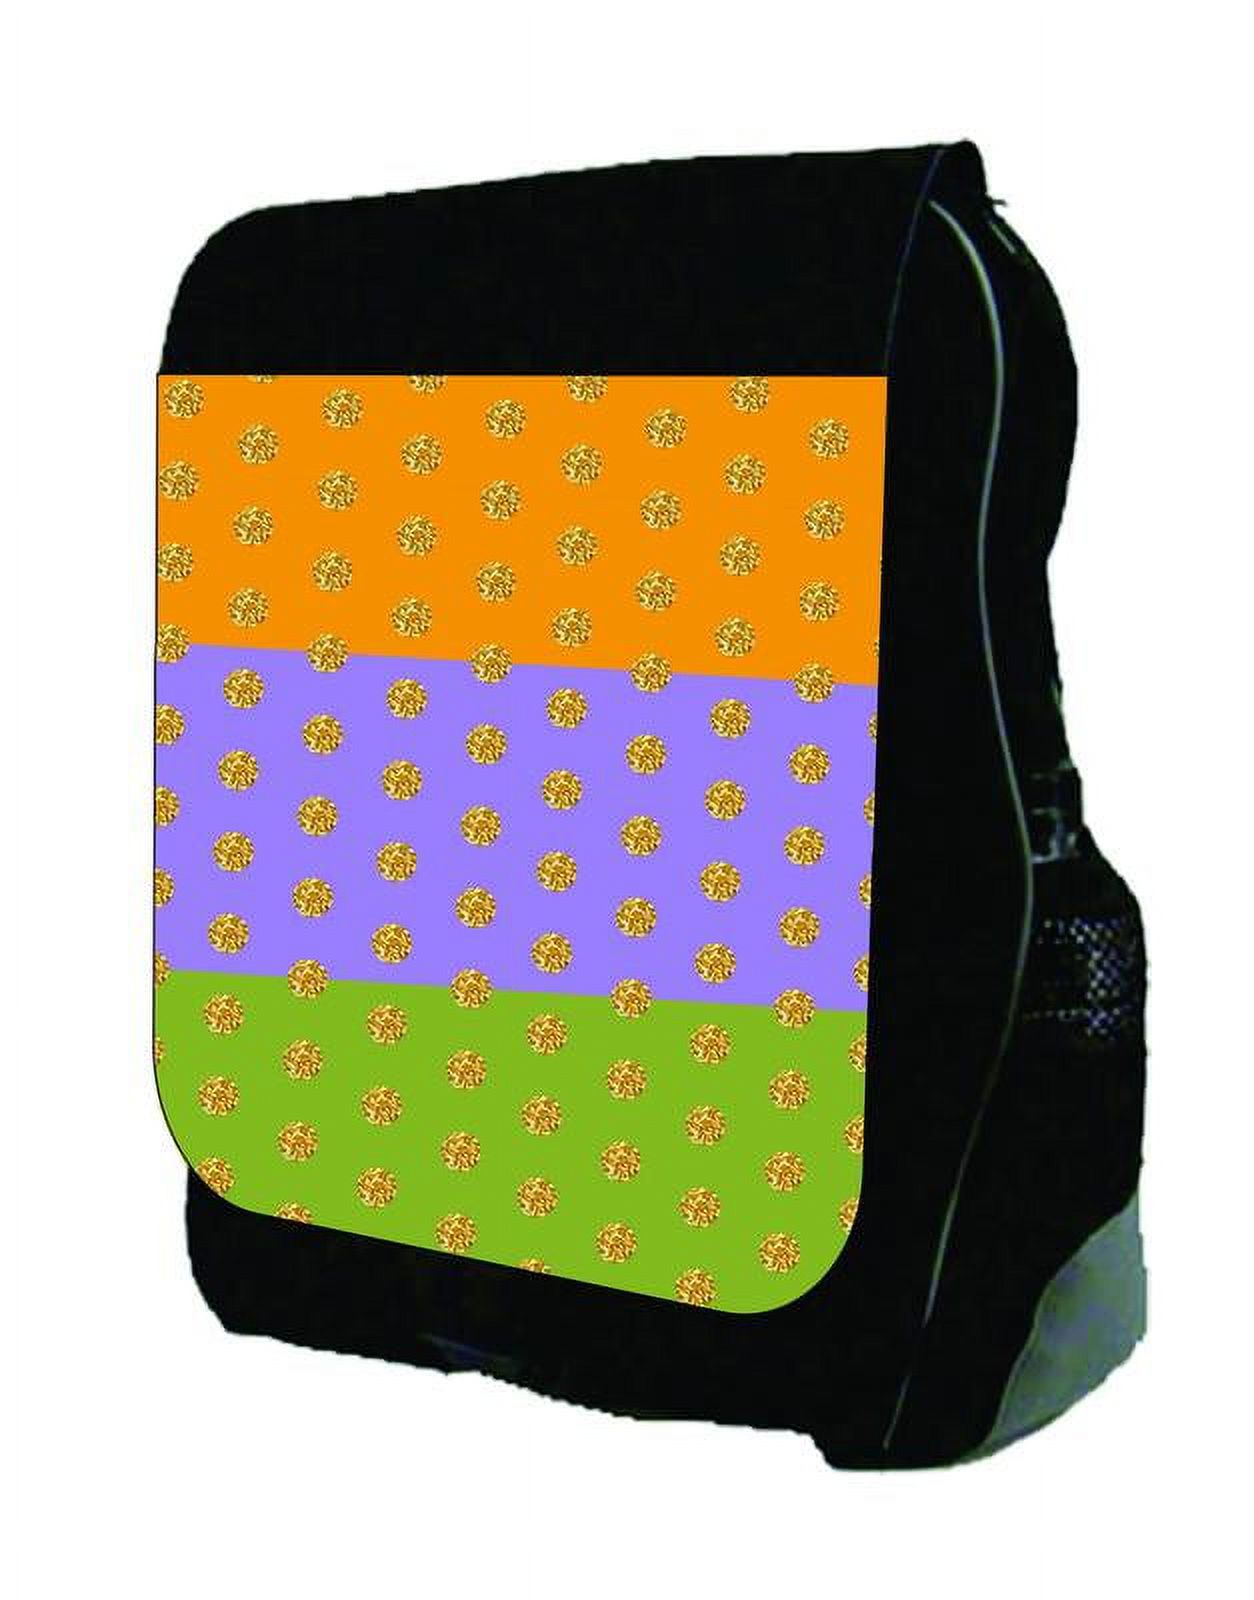 Colorblocked Orange, Purple, Lime Stripes with Gold Polka Dots - Black School Backpack - image 1 of 4